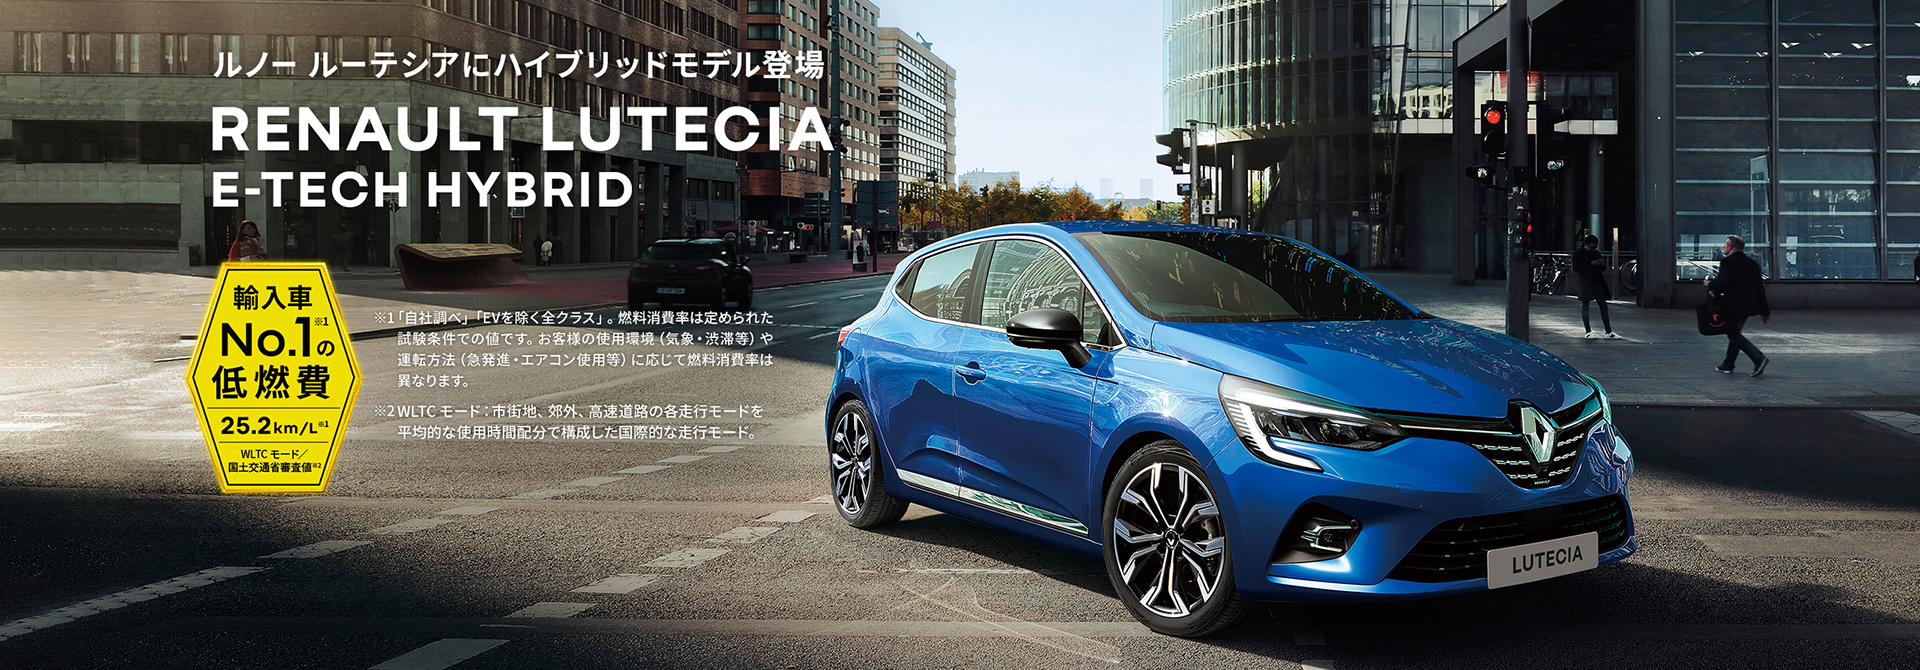 ALL NEW Renault LUTECIA 新型ルノー ルーテシア